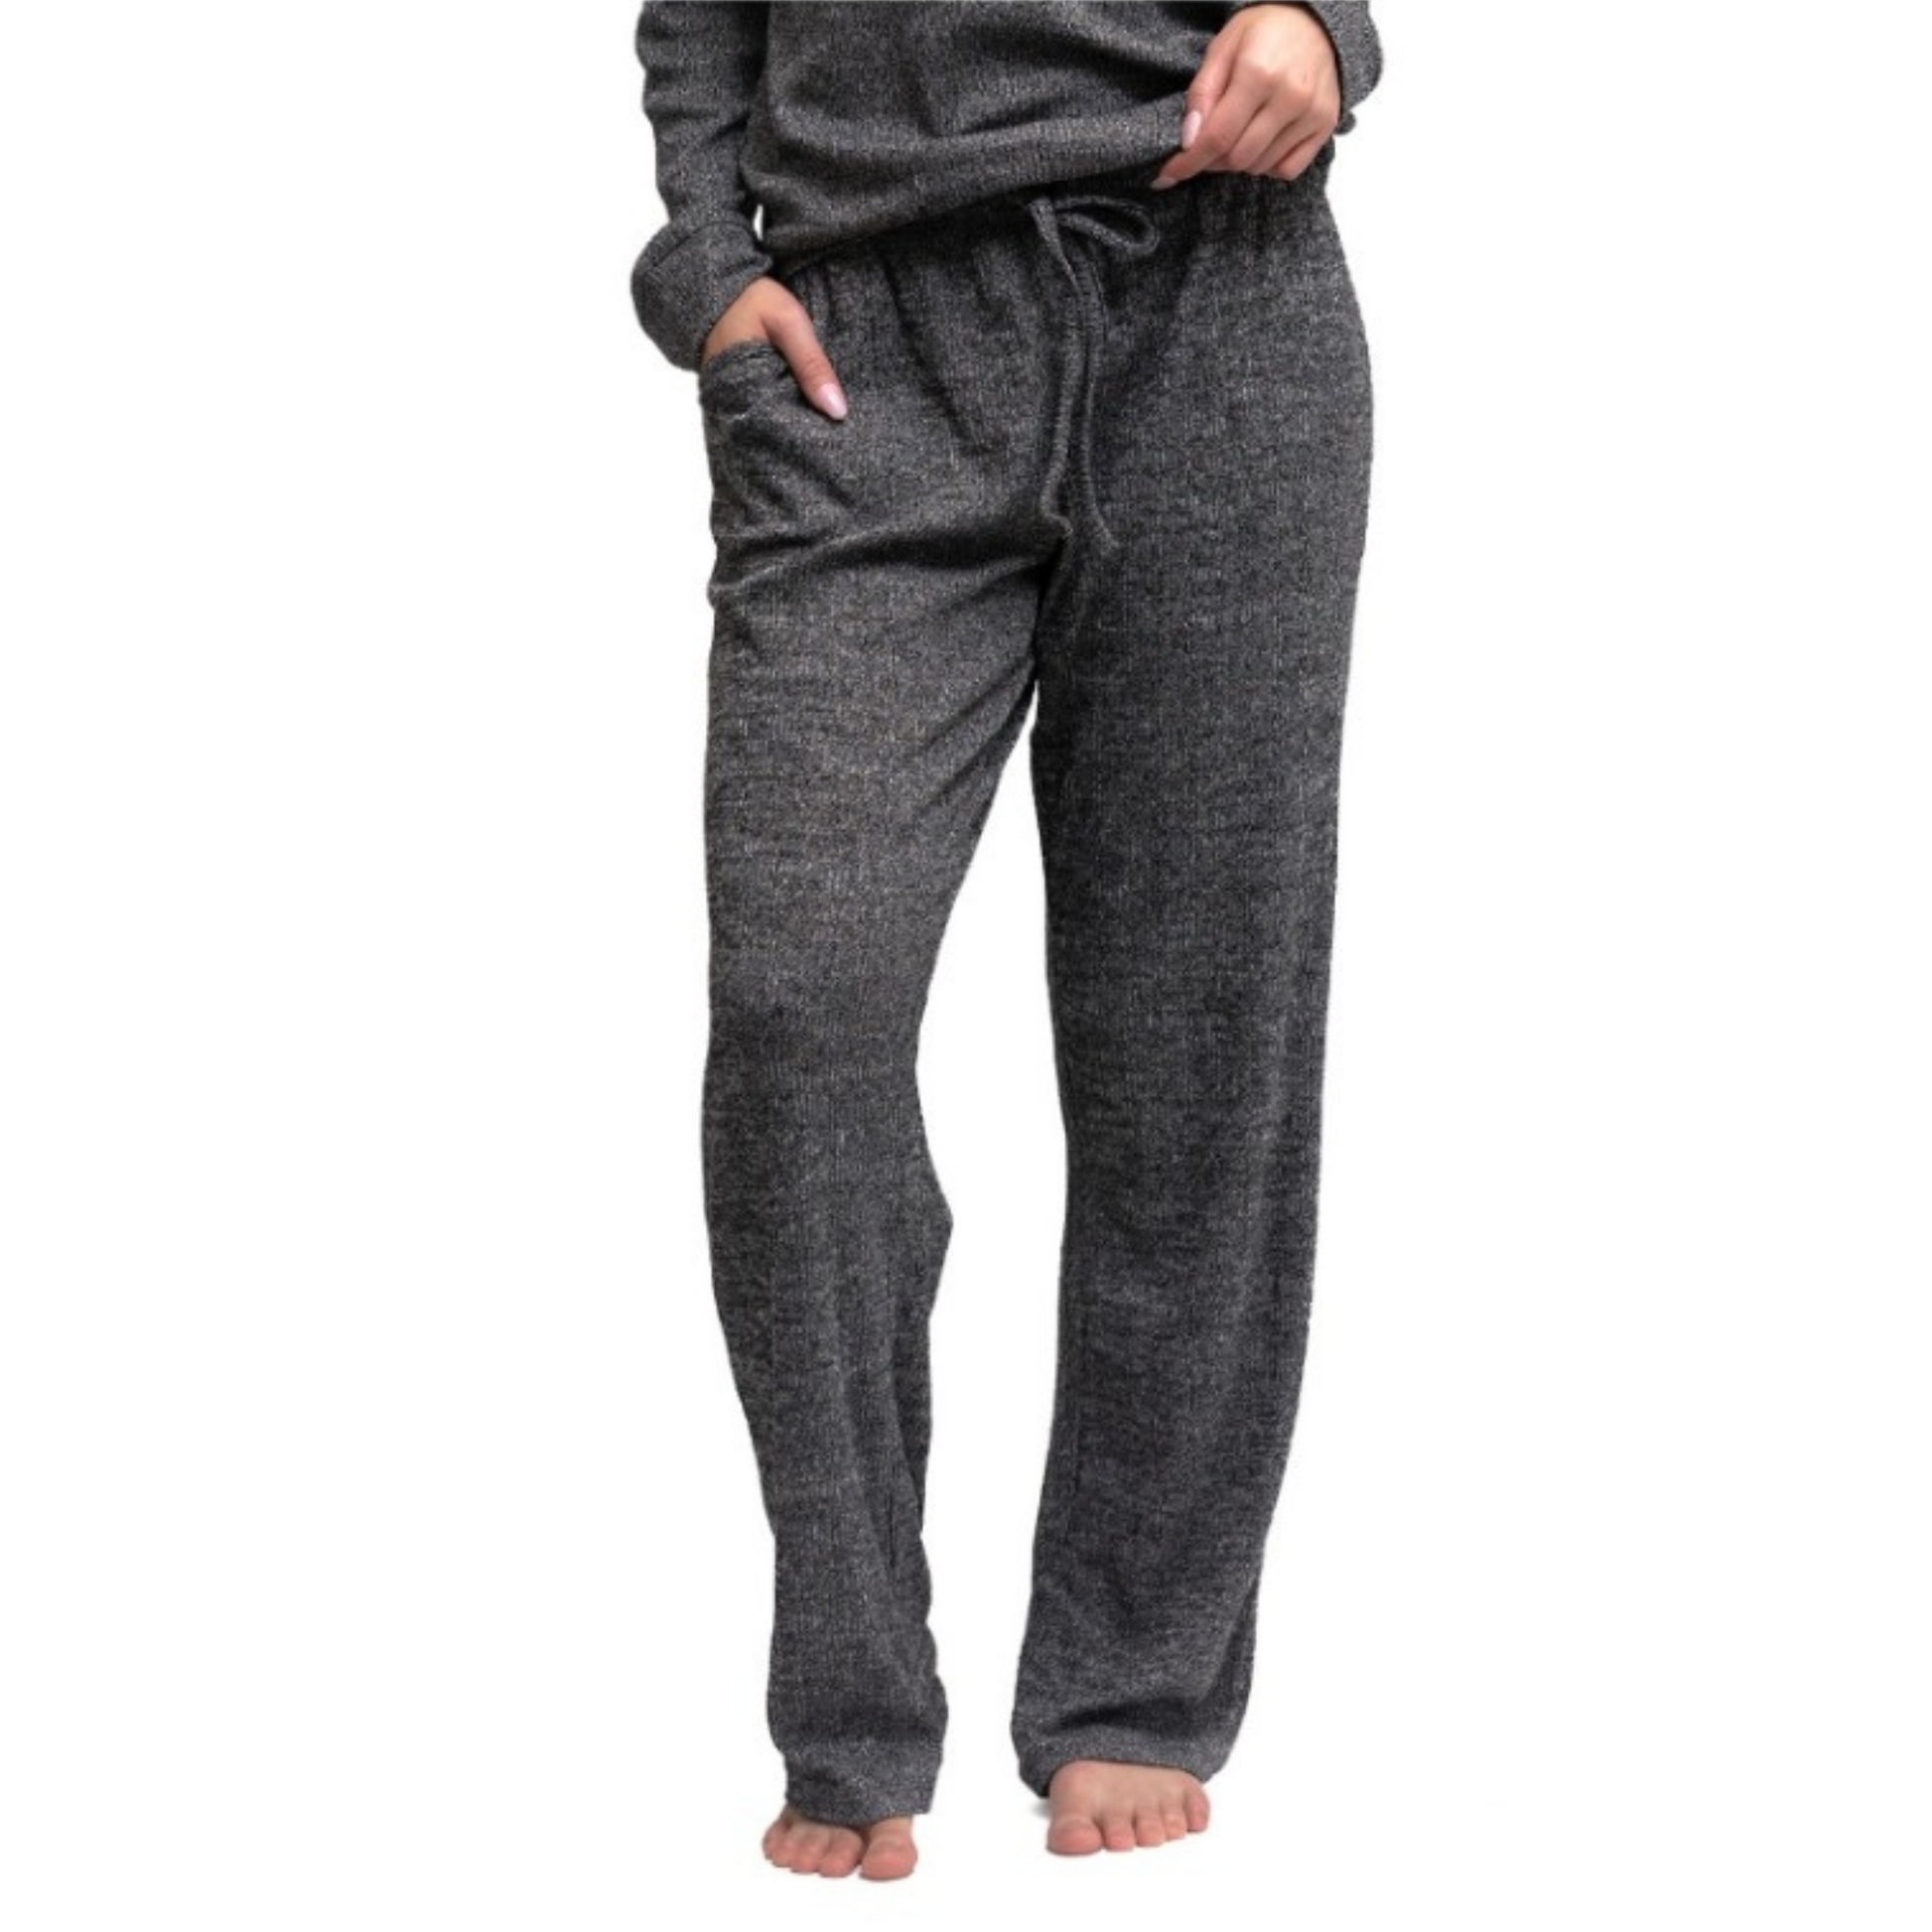 Our Cuddle Blend Lounge Pants are designed with both comfort and style in mind. These pants are crafted with a dreamy, soft fabric and available in pink and grey. The Cuddle Blend Lounge Pants can be paired with matching cardigans and tanks.